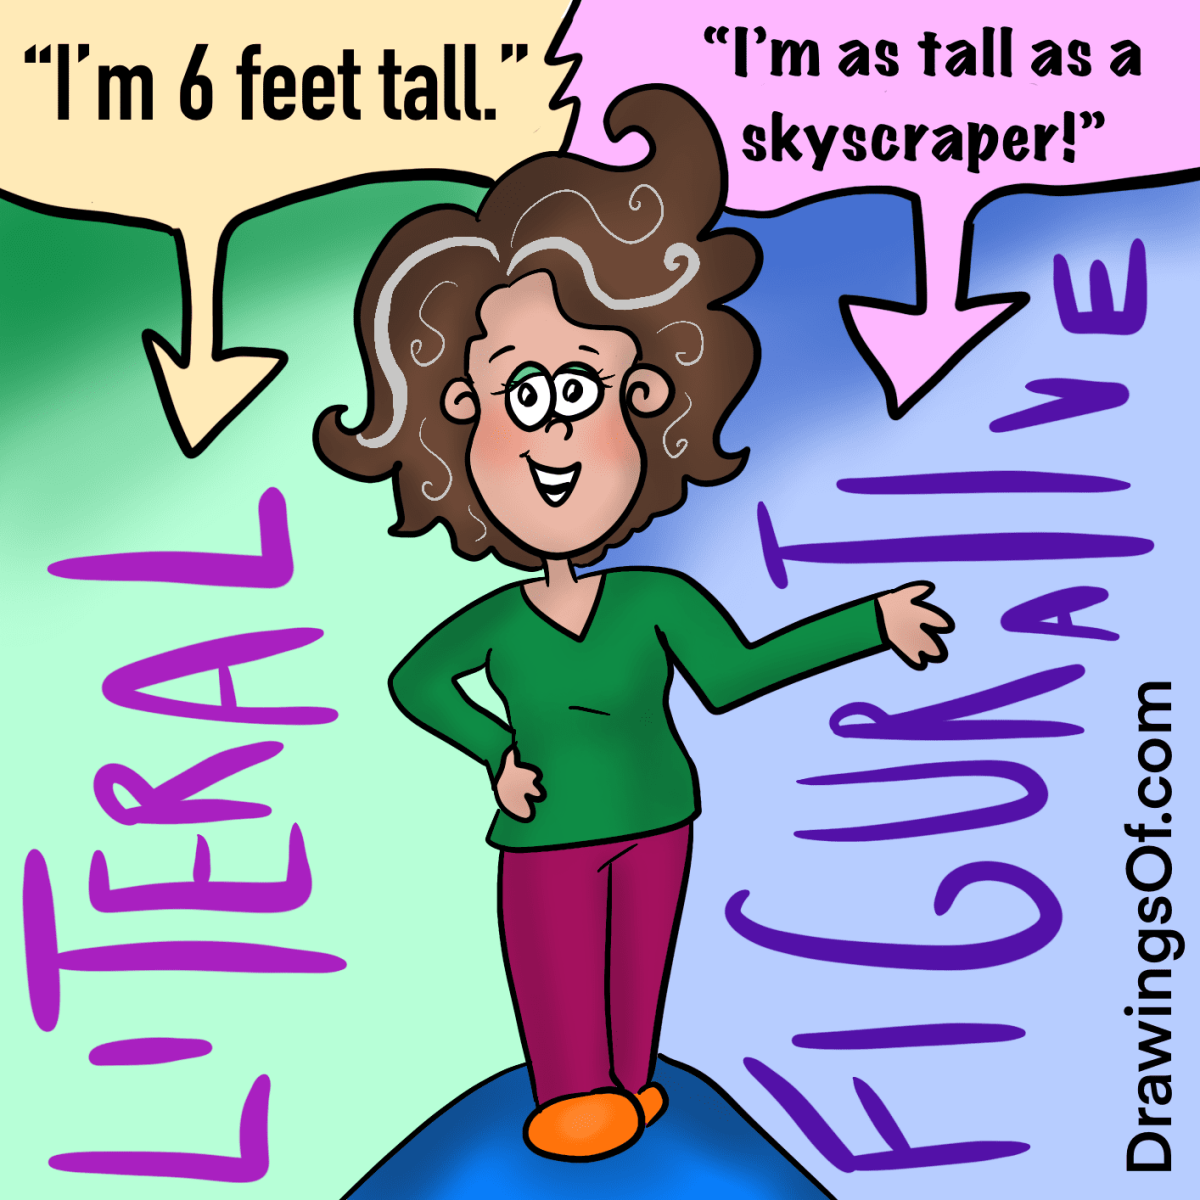 Image: A woman confidently discussing her height, both in a literal sense as she stands tall, and in a figurative sense as she expresses her self-assurance and pride in her personal growth and achievements.